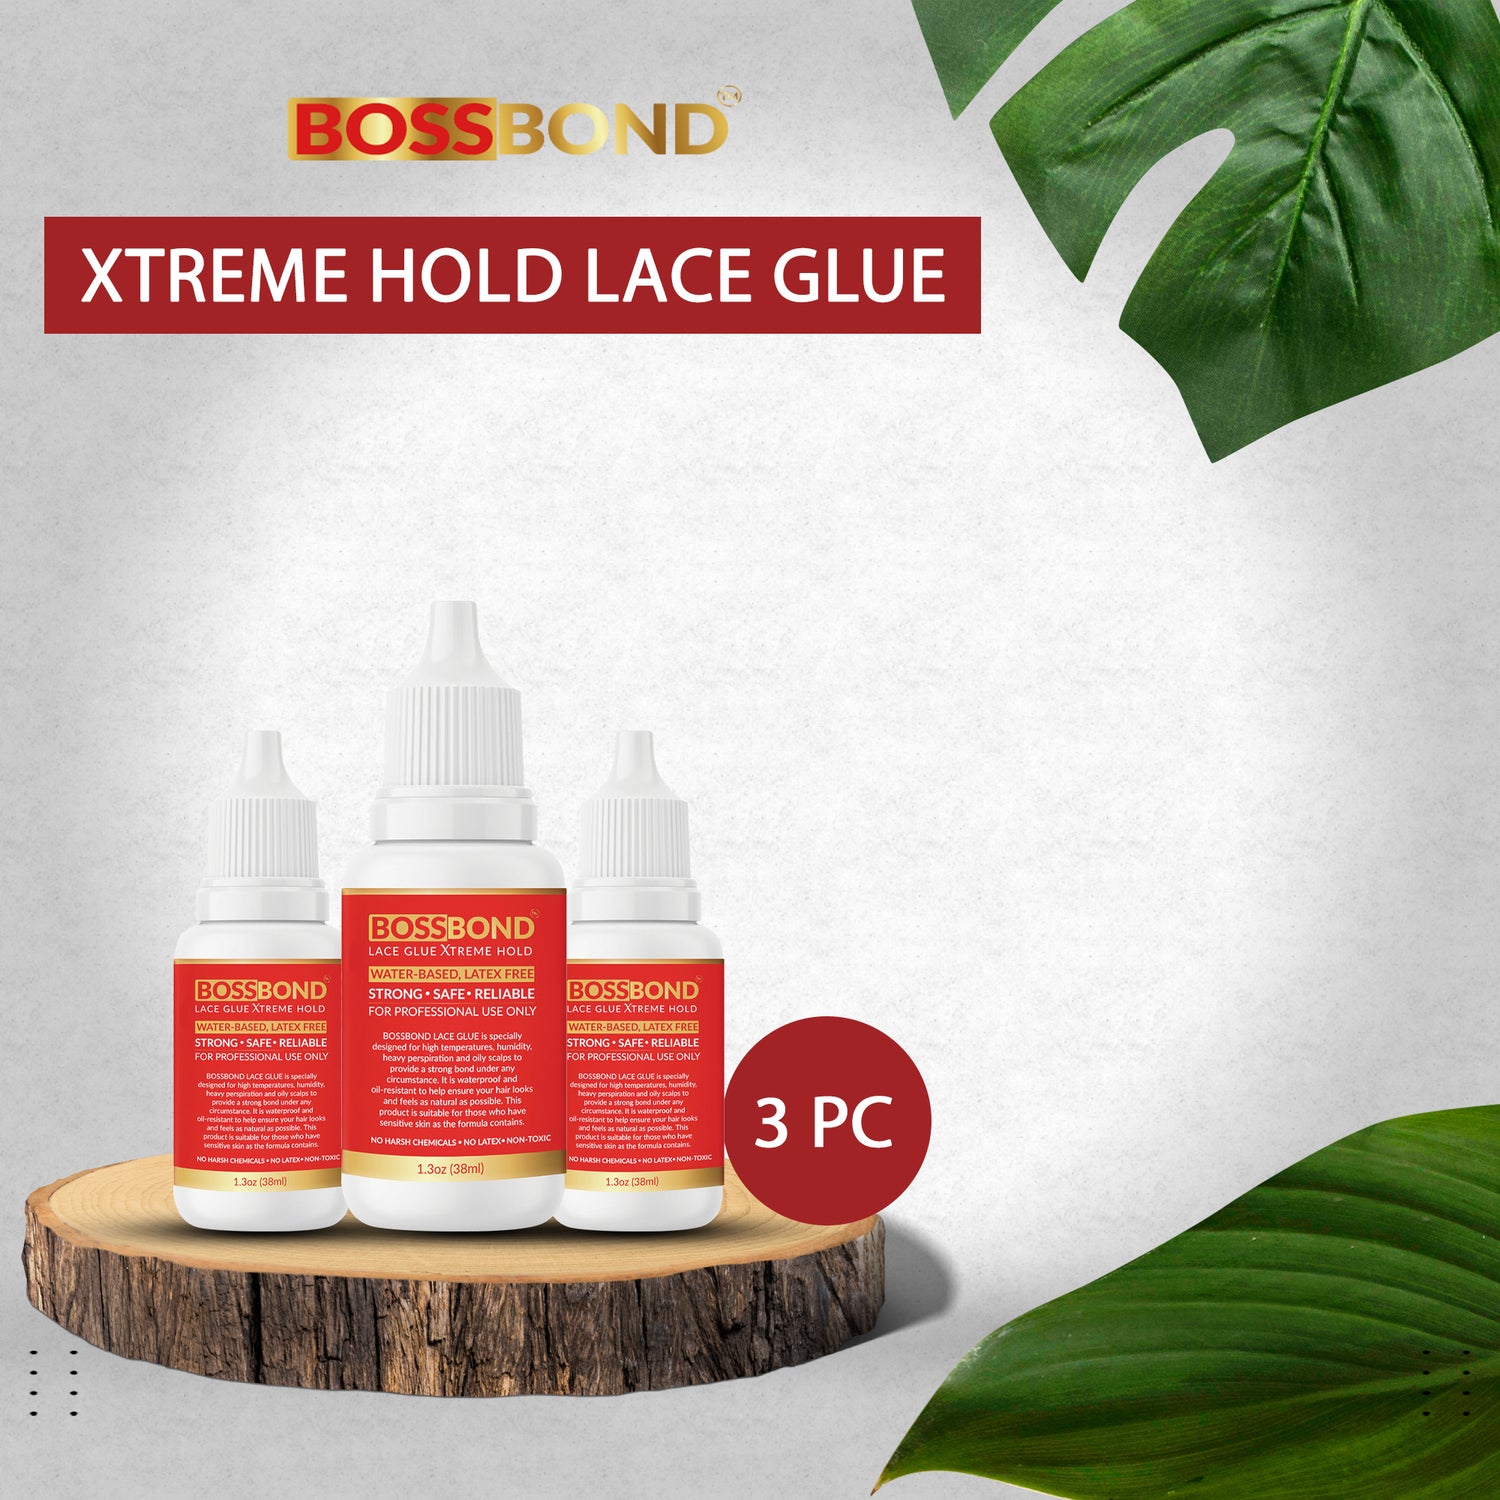 BOSSBOND Xtreme Hold Lace Glue Pack of 3 (1.3 Fl oz)